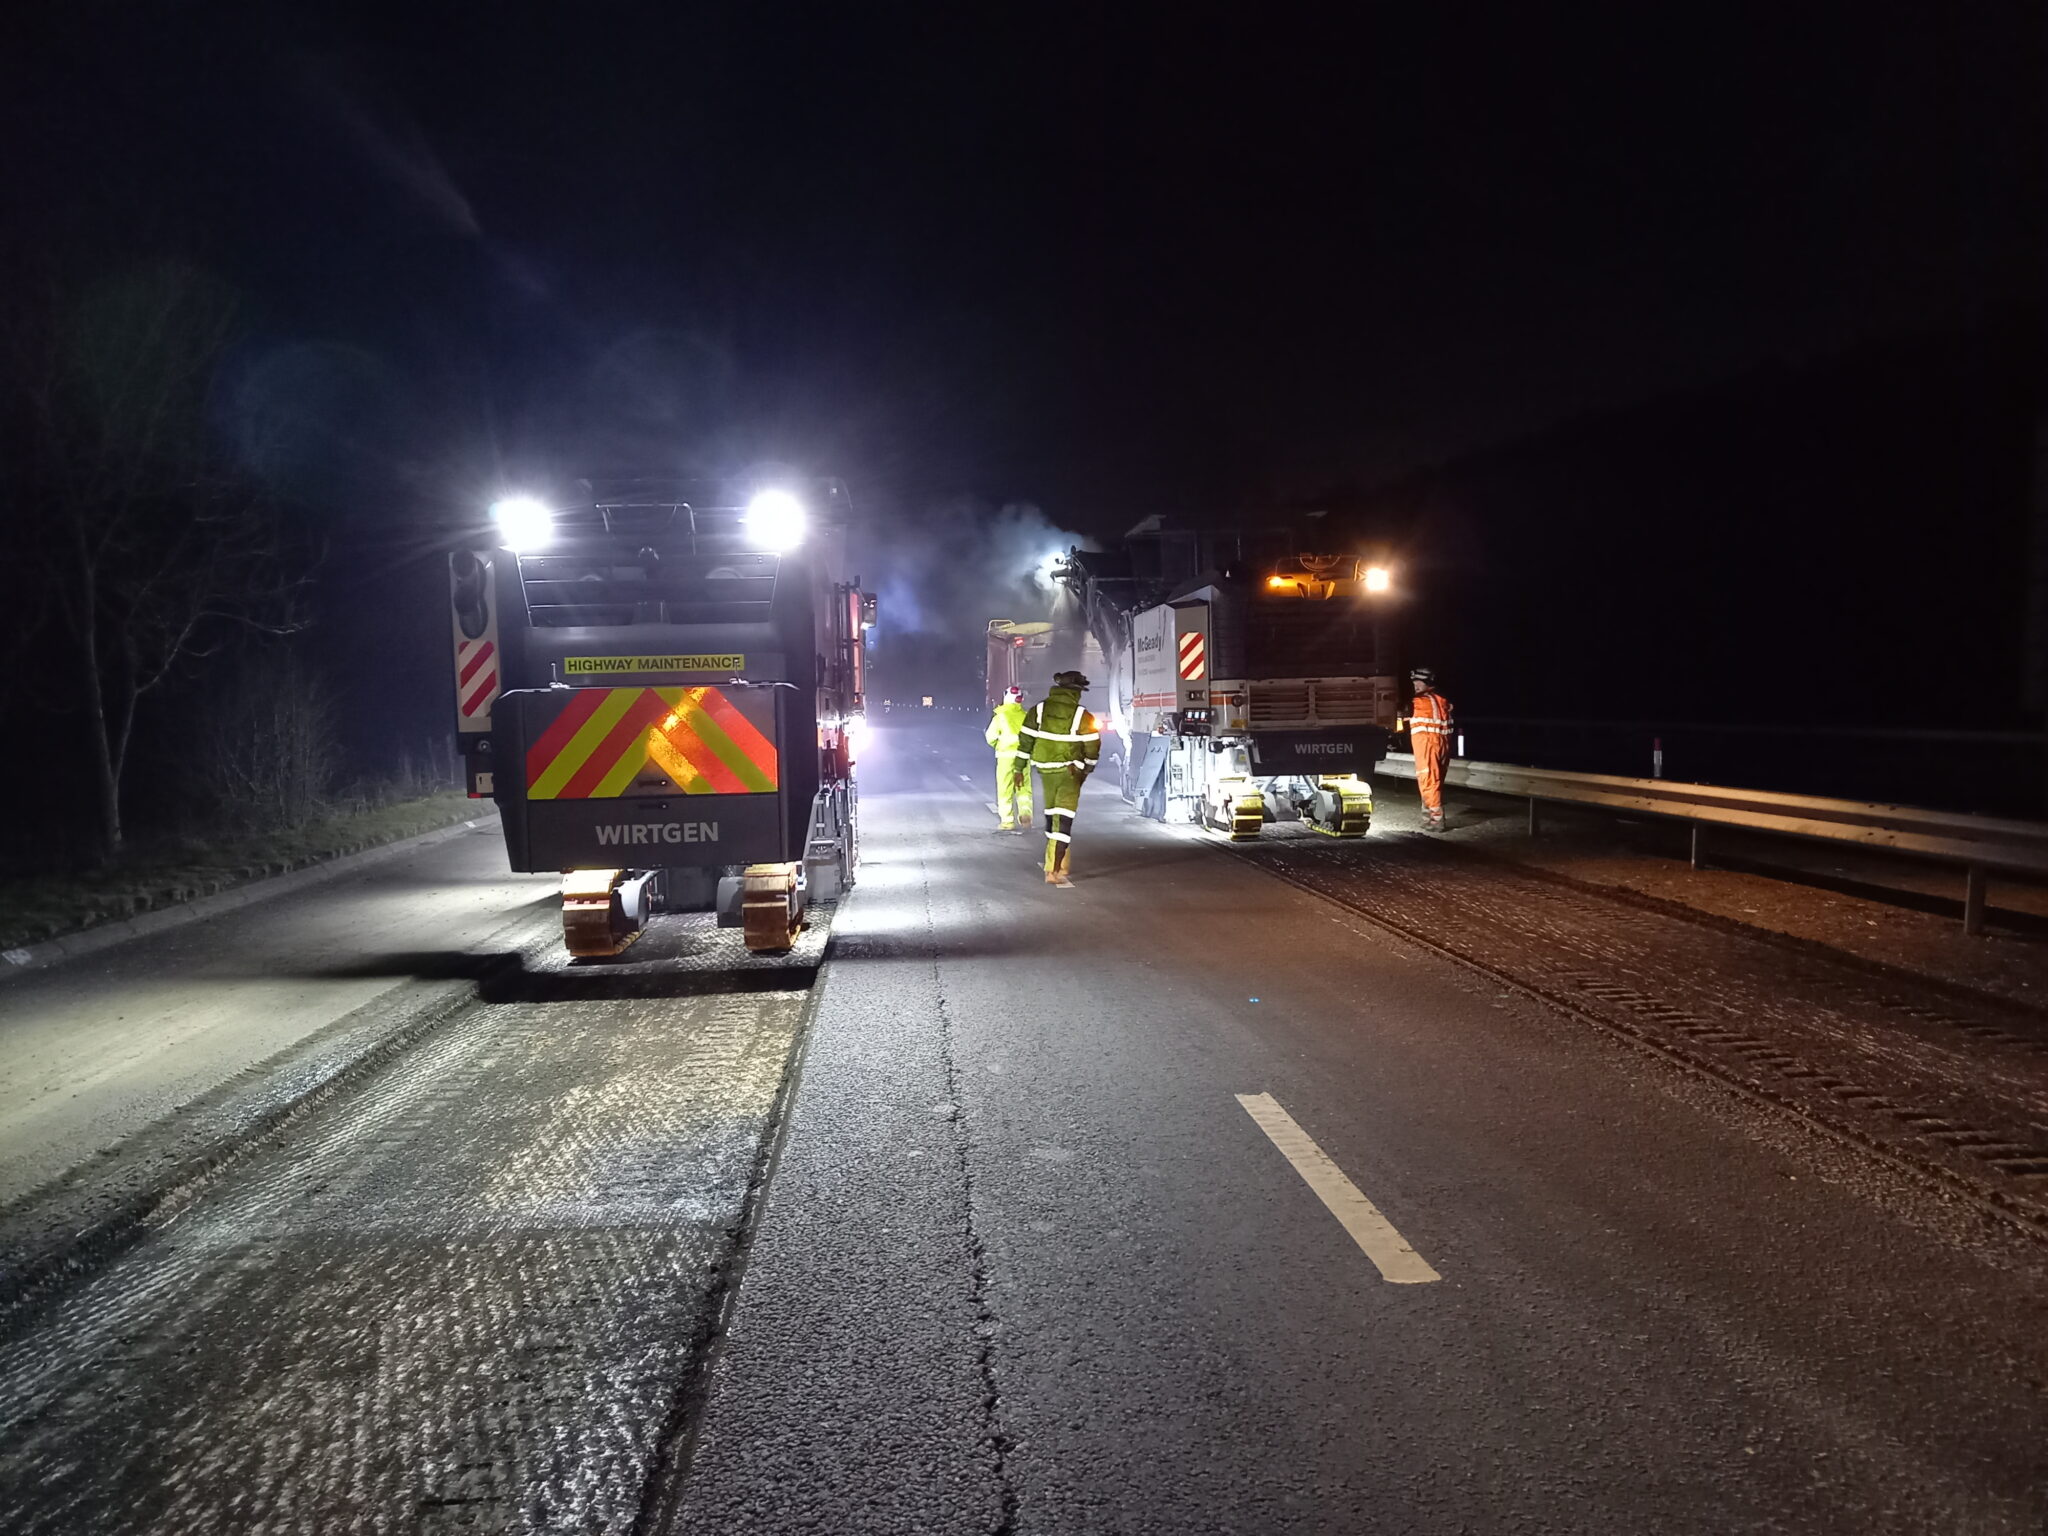 OVERNIGHT CLOSURES FOR RESURFACING WORKS ON A68